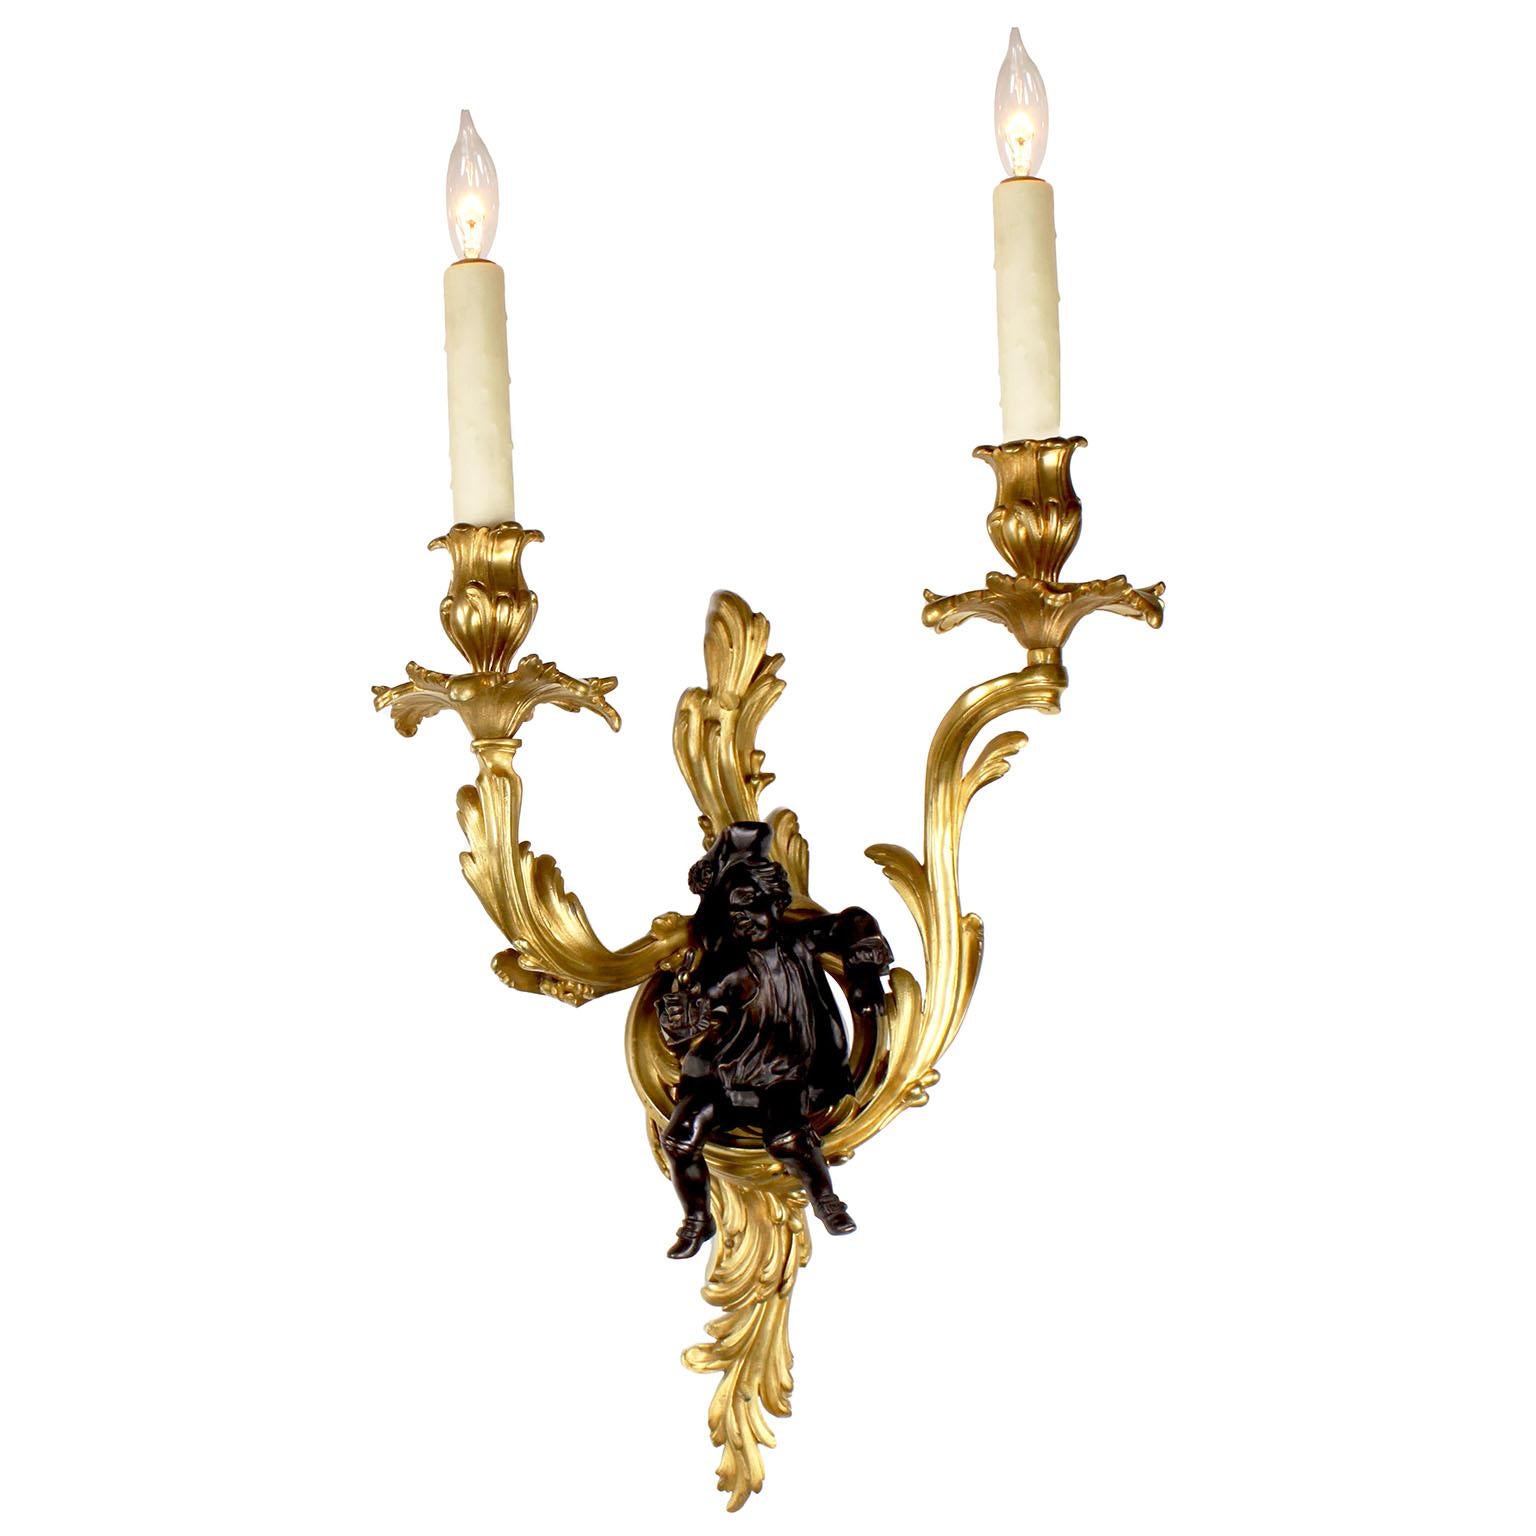 Patinated Fine Pair of French 19th-20th Century Louis XV Style Figural Wall Light Sconces